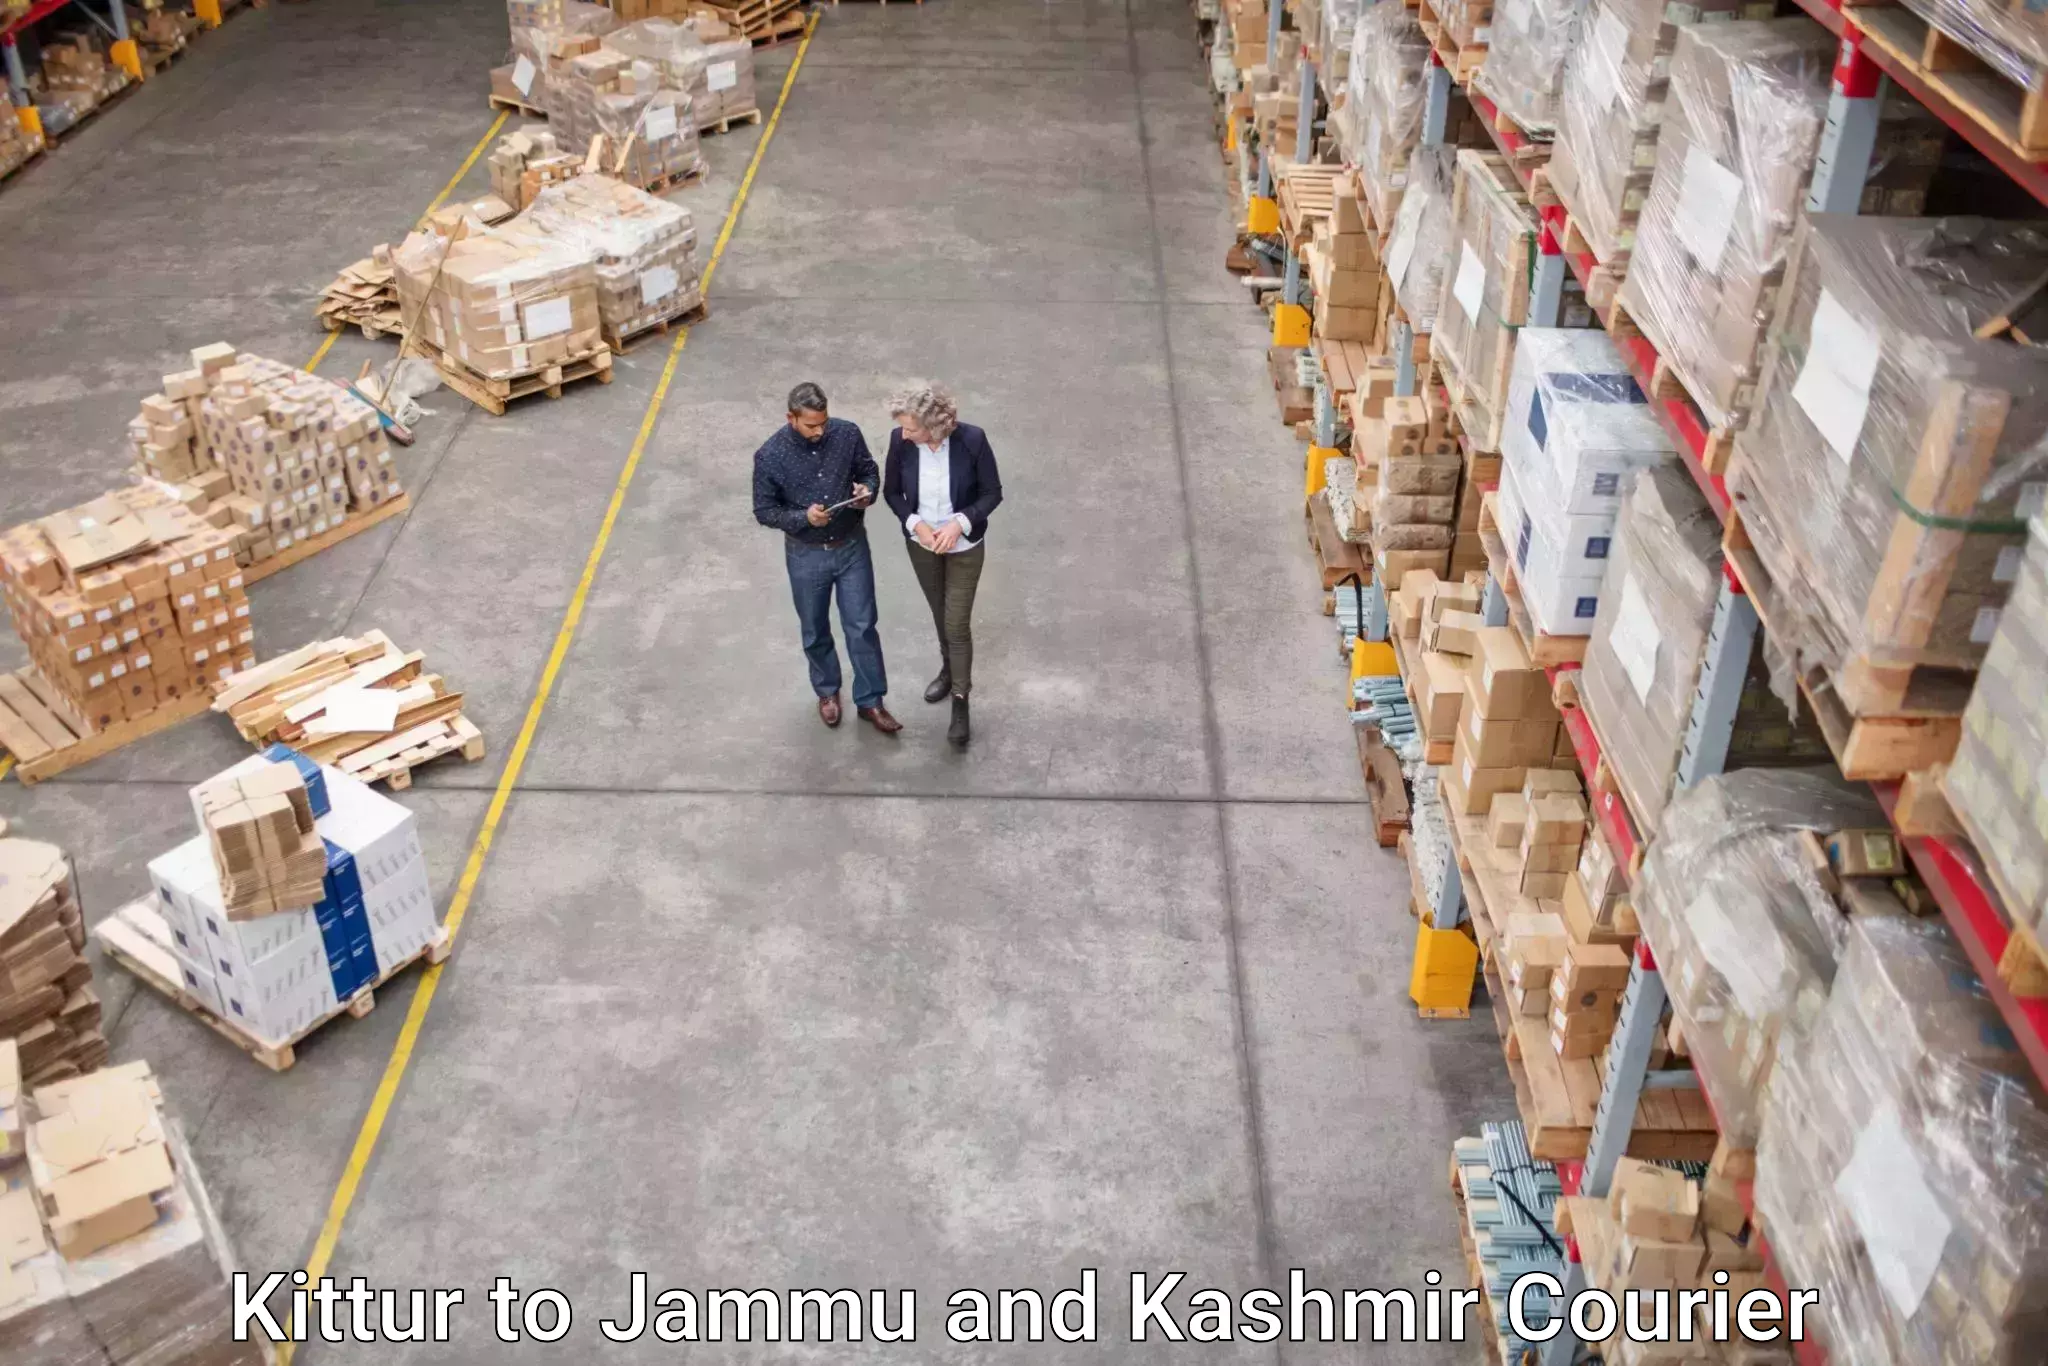 24-hour courier service Kittur to Jammu and Kashmir